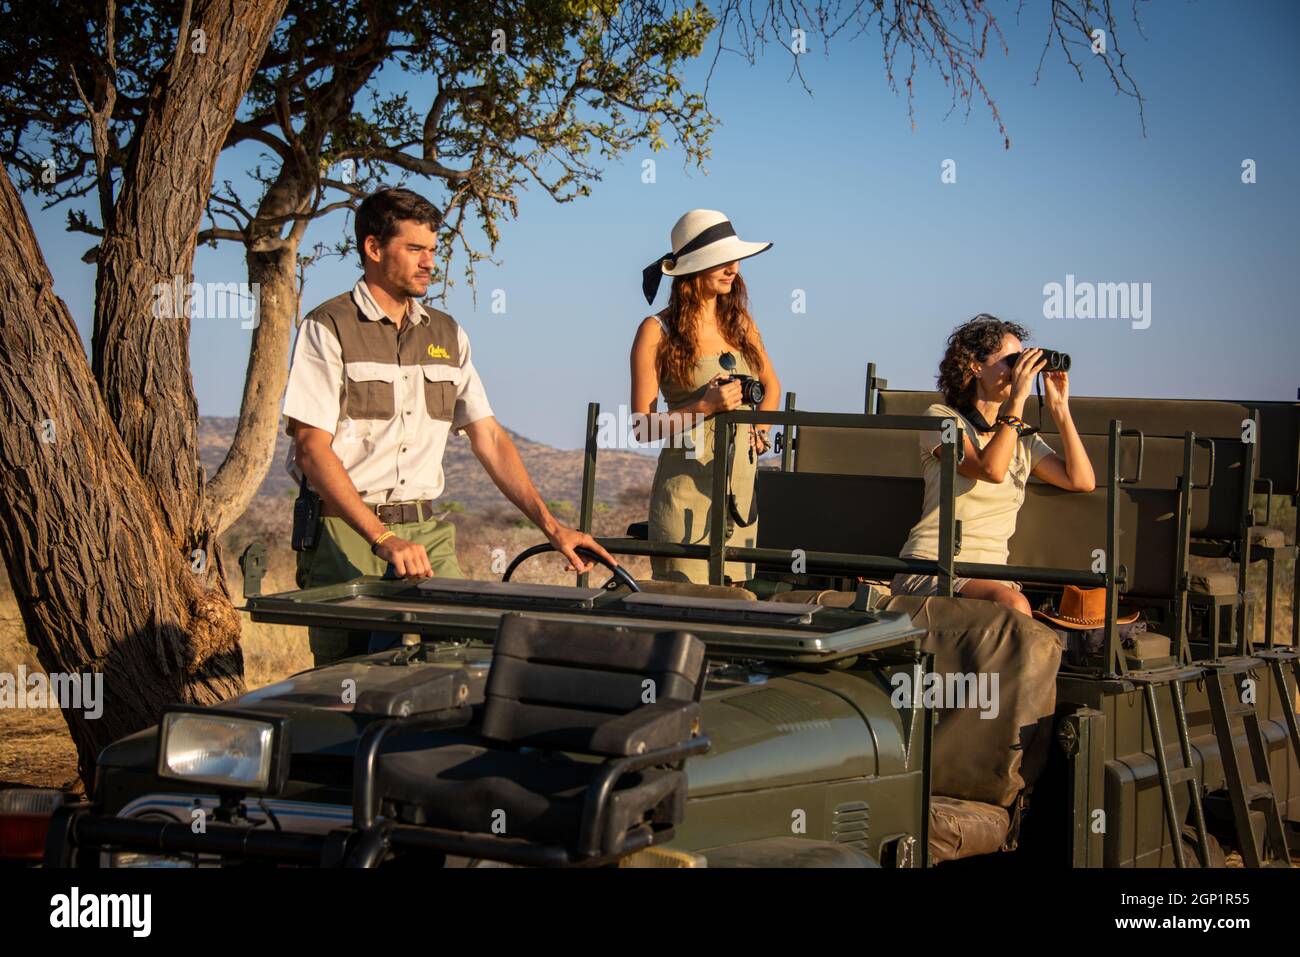 Guide and guests in jeep by tree Stock Photo